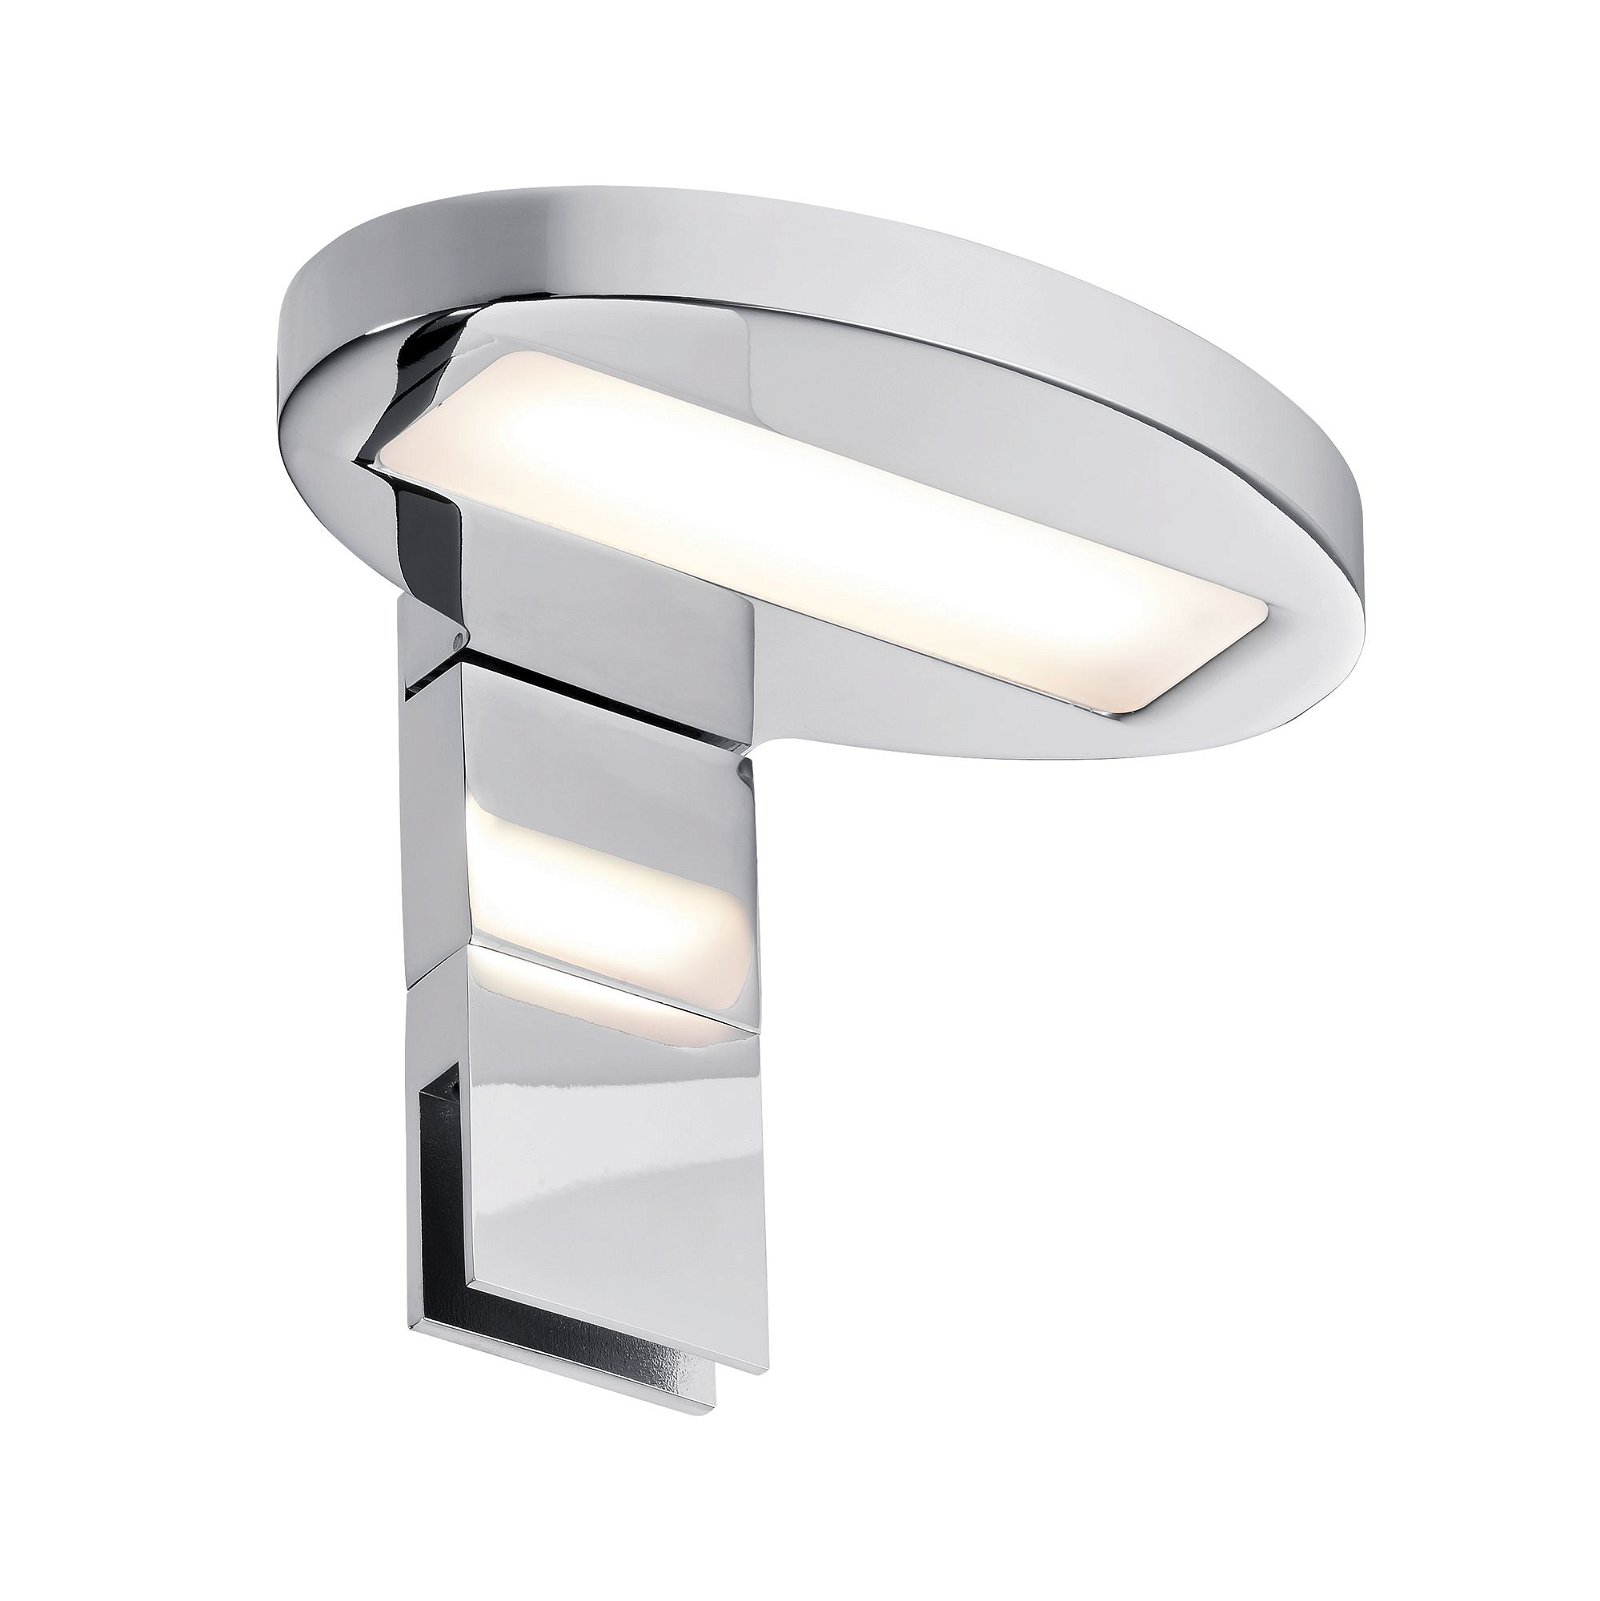 Galeria mirror and cabinet luminaire LED Oval 3.2W chrome